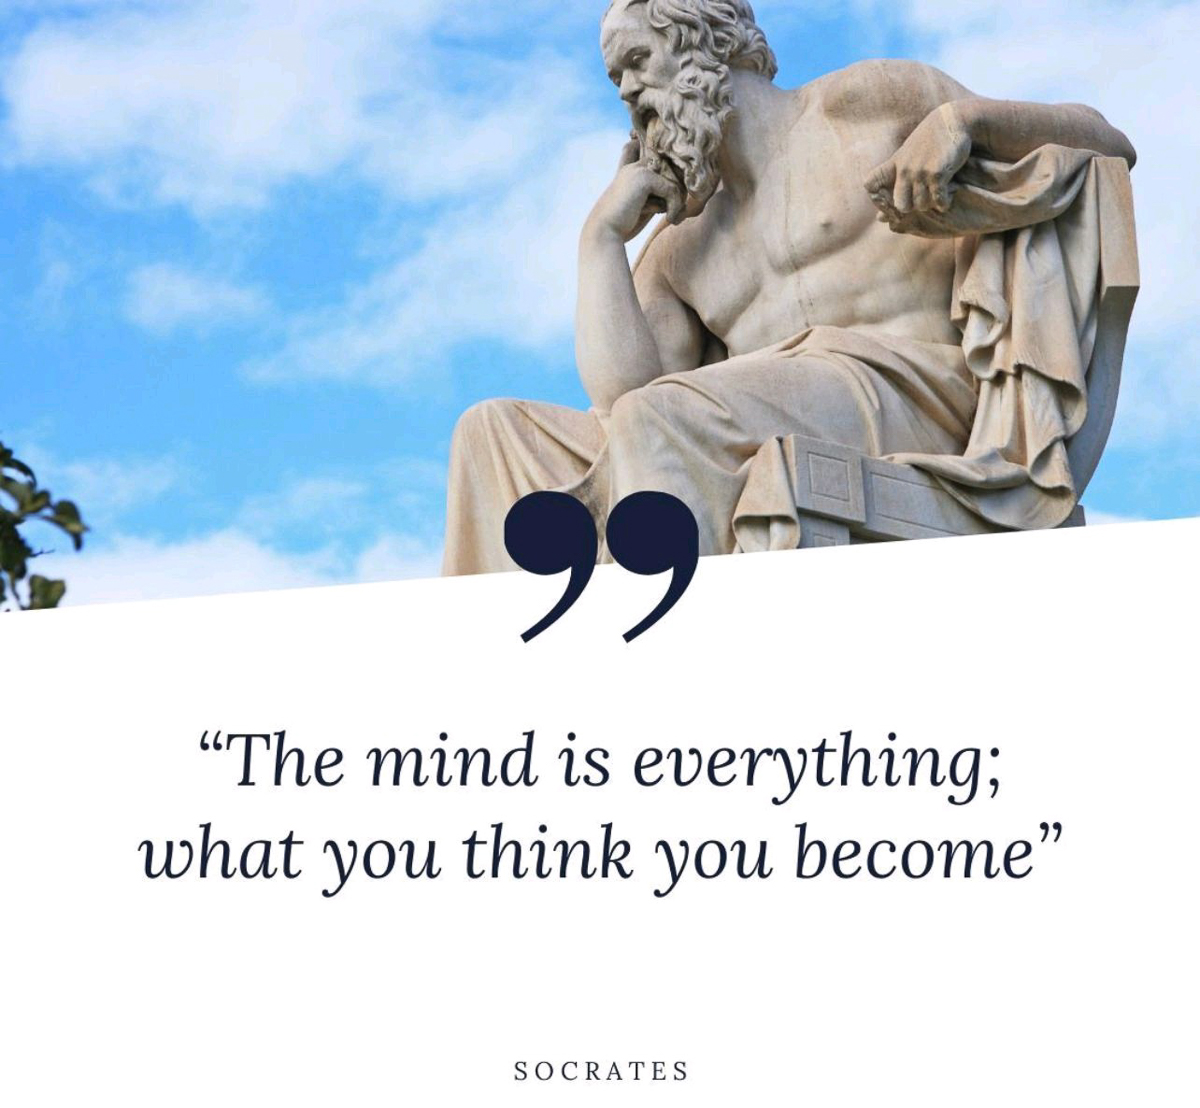 The mind is everything - what you think you become  ~~  